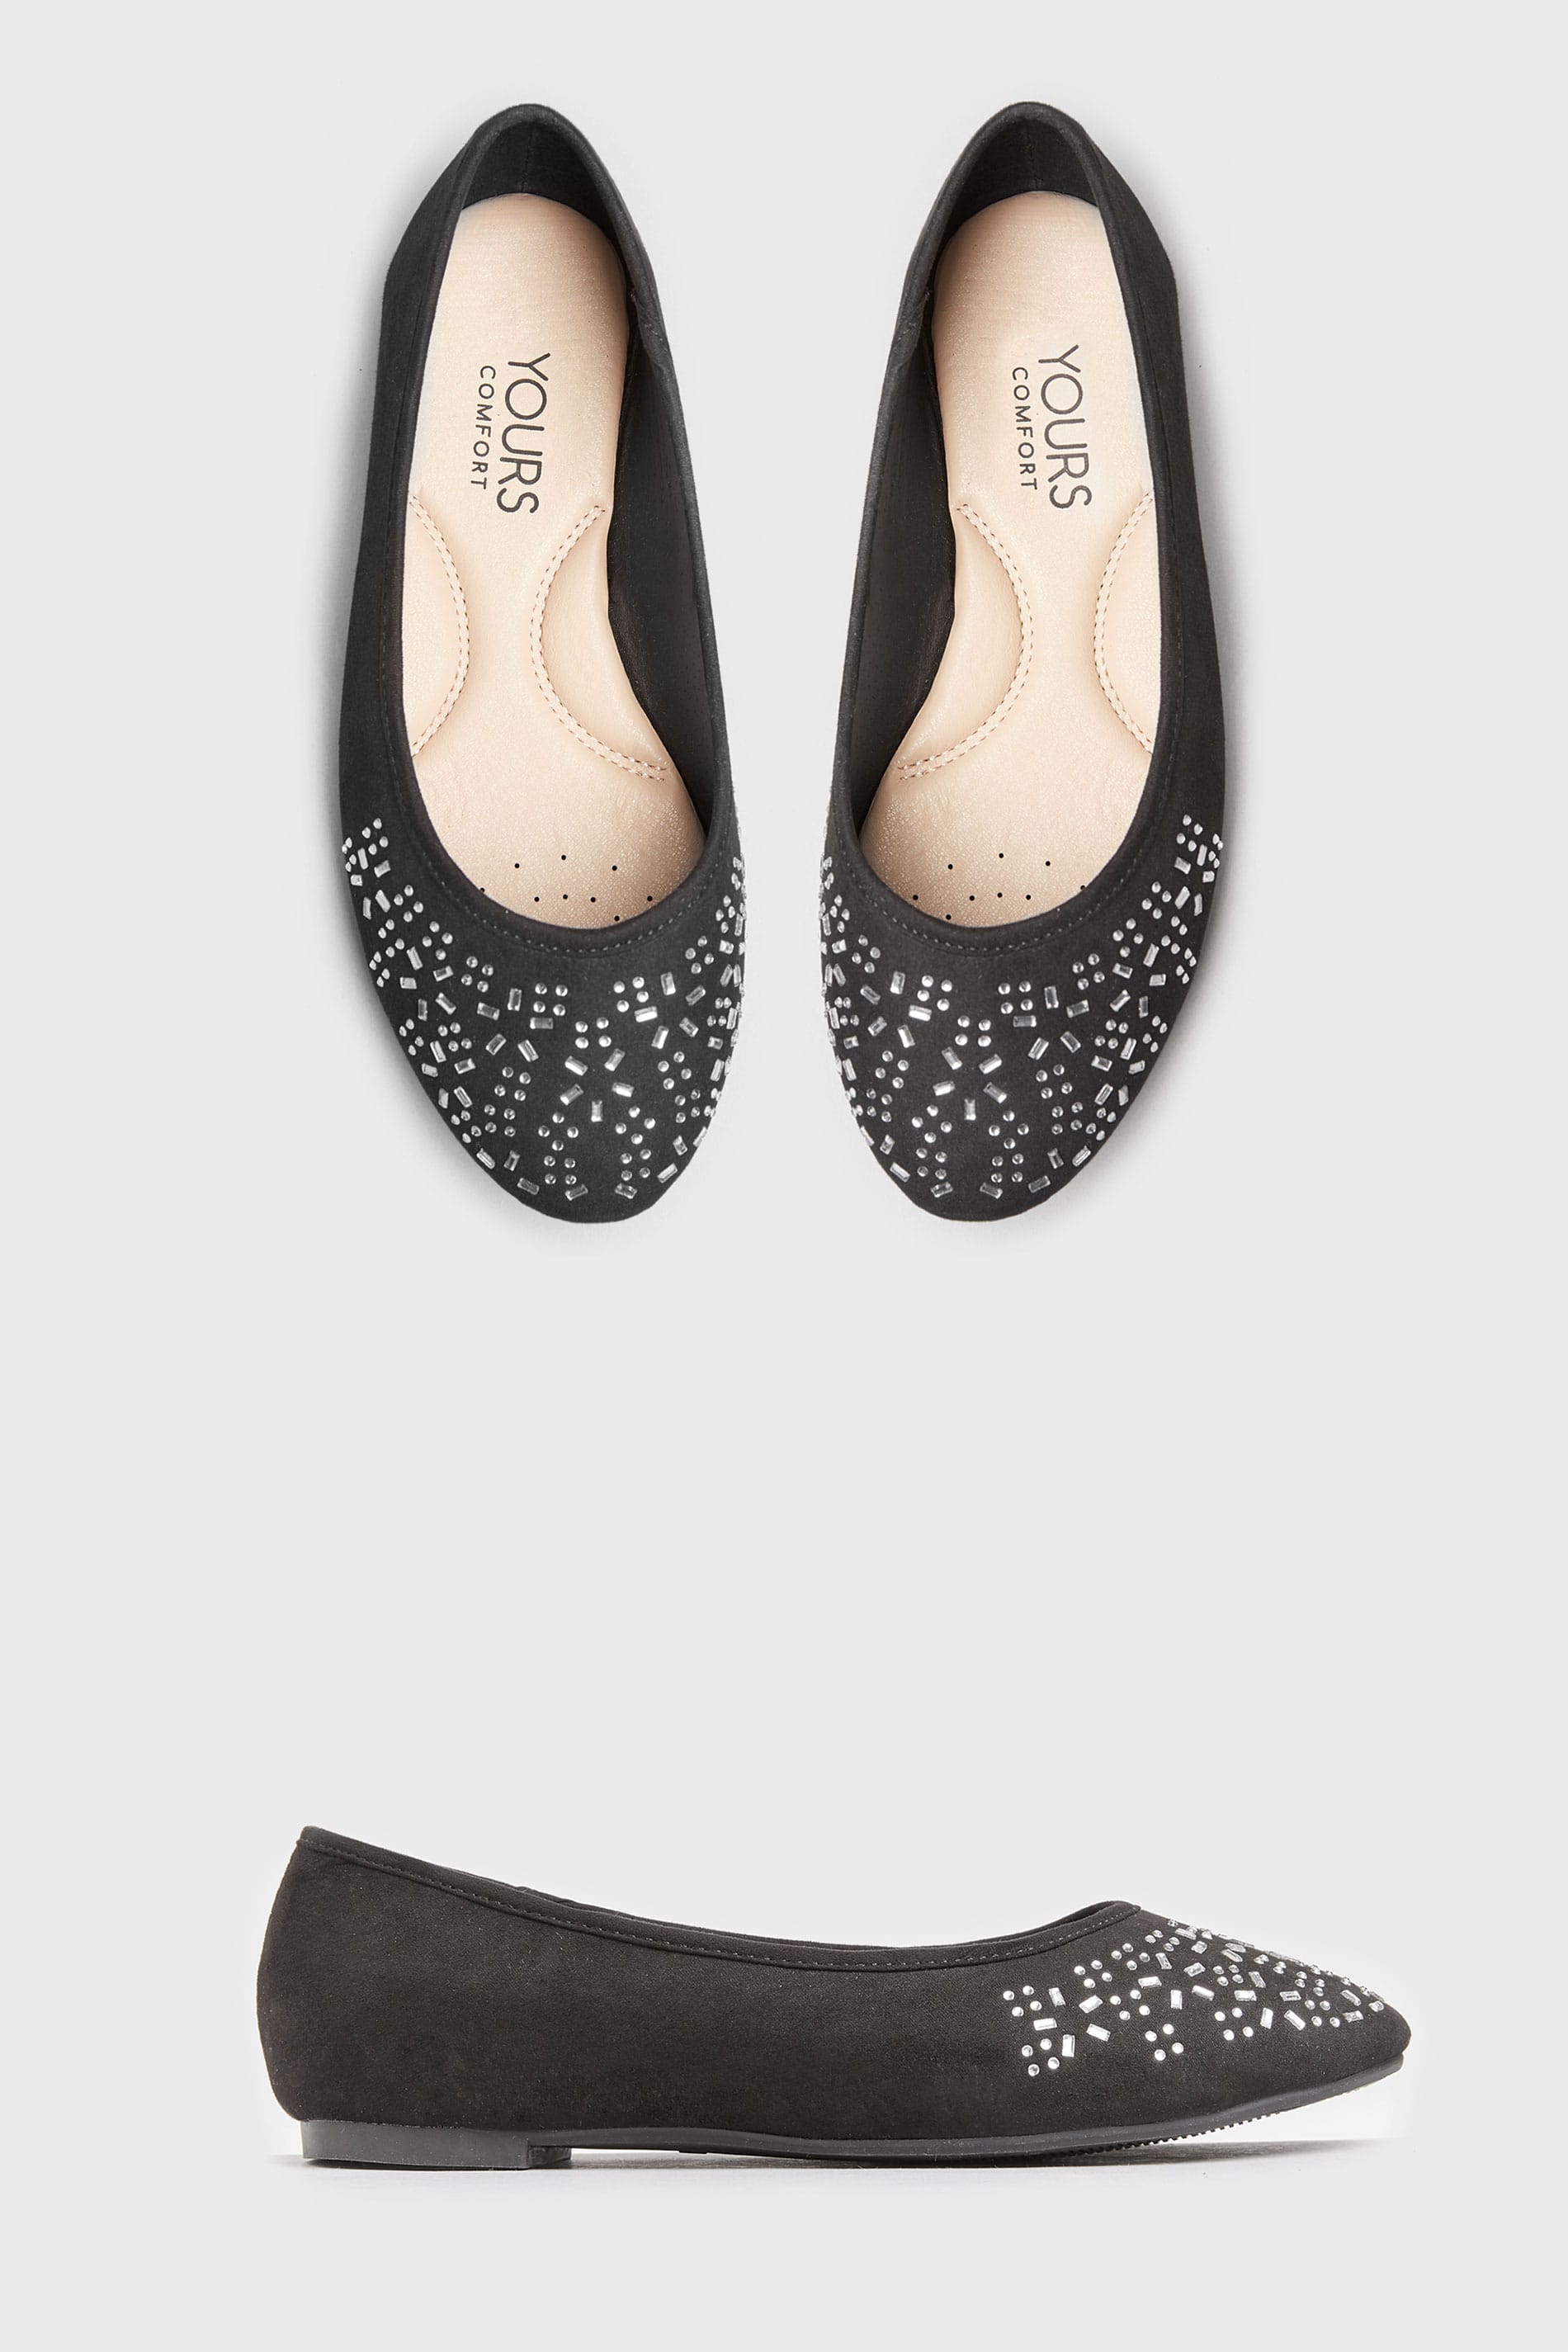 Black Diamante Ballerina Pumps In Extra Wide Fit | Yours Clothing